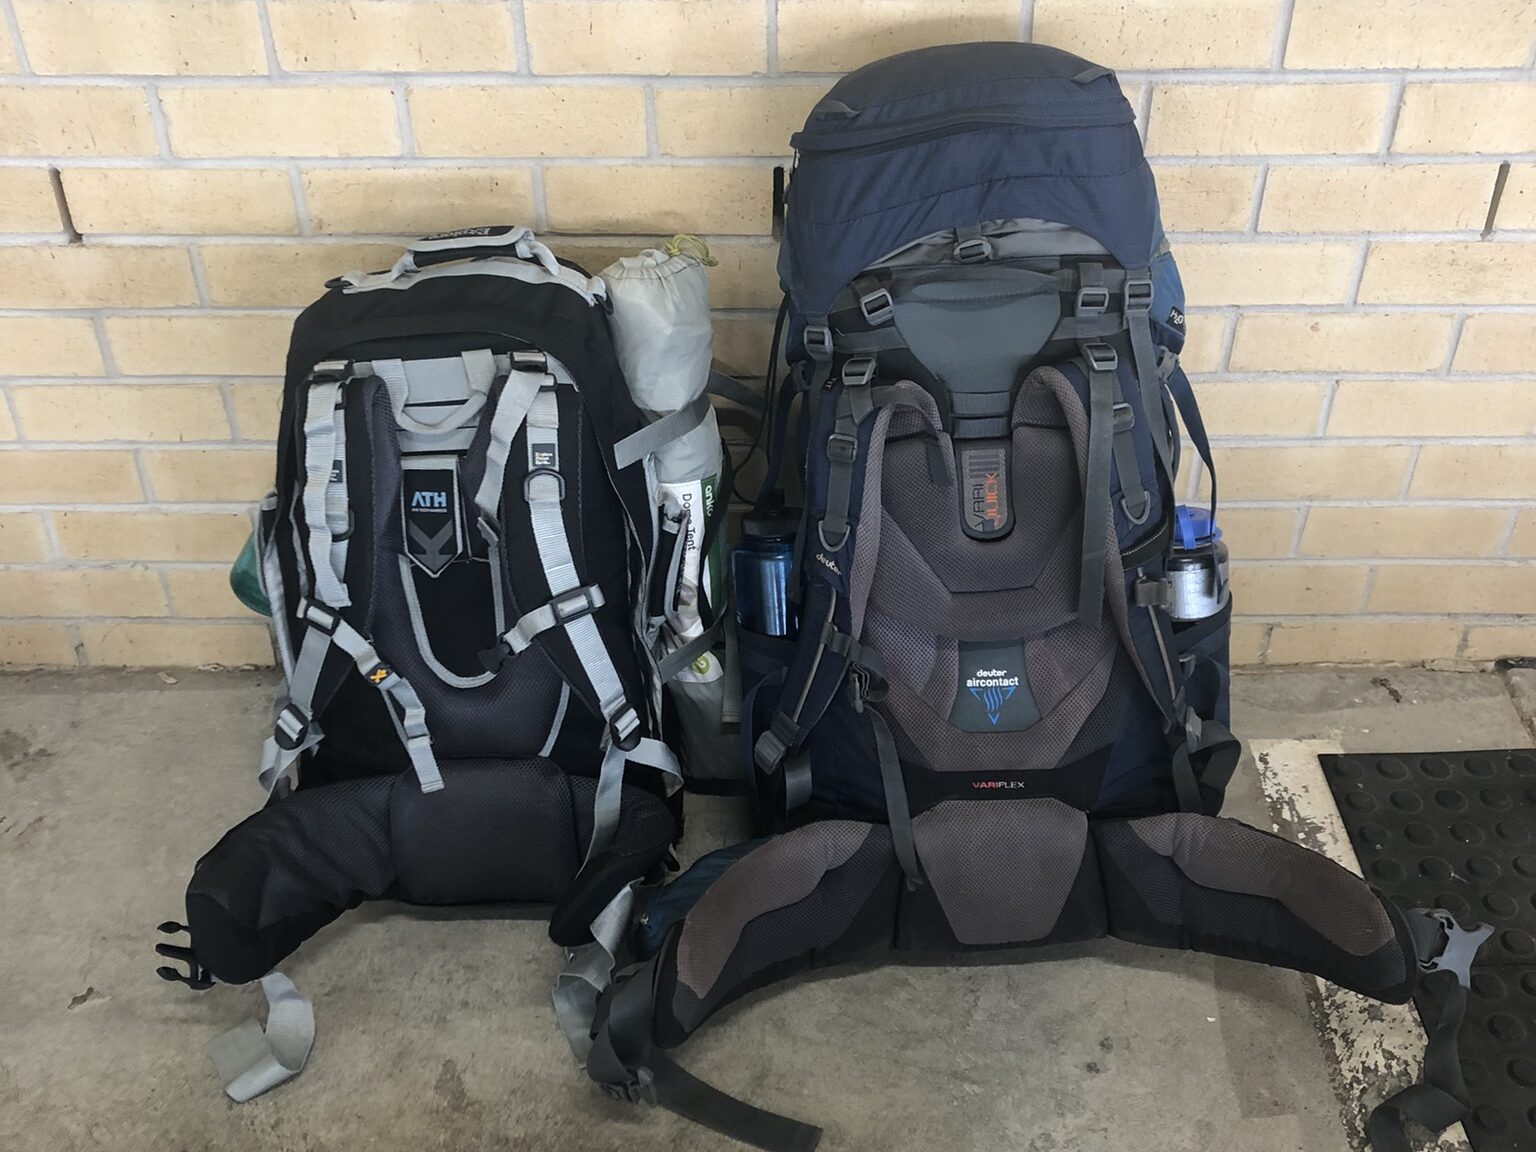 Yentl's and Avalon's backpacks at start of the trip